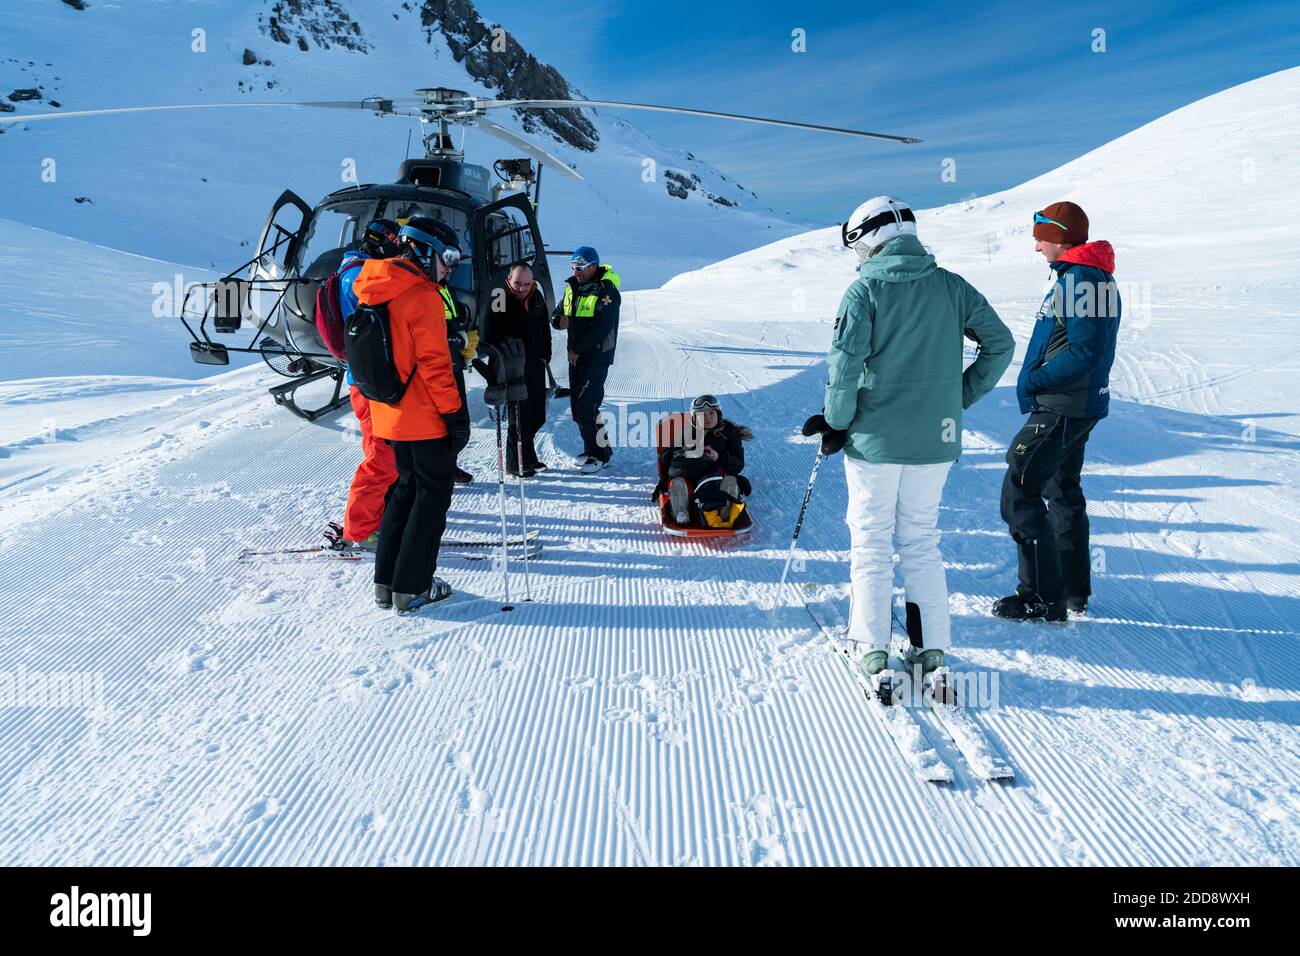 Mountain rescue team with helicopter rescuing an injured skier in a stretcher after having a skiing accident in the Alps mountains, at Avoriaz, France, Europe Stock Photo